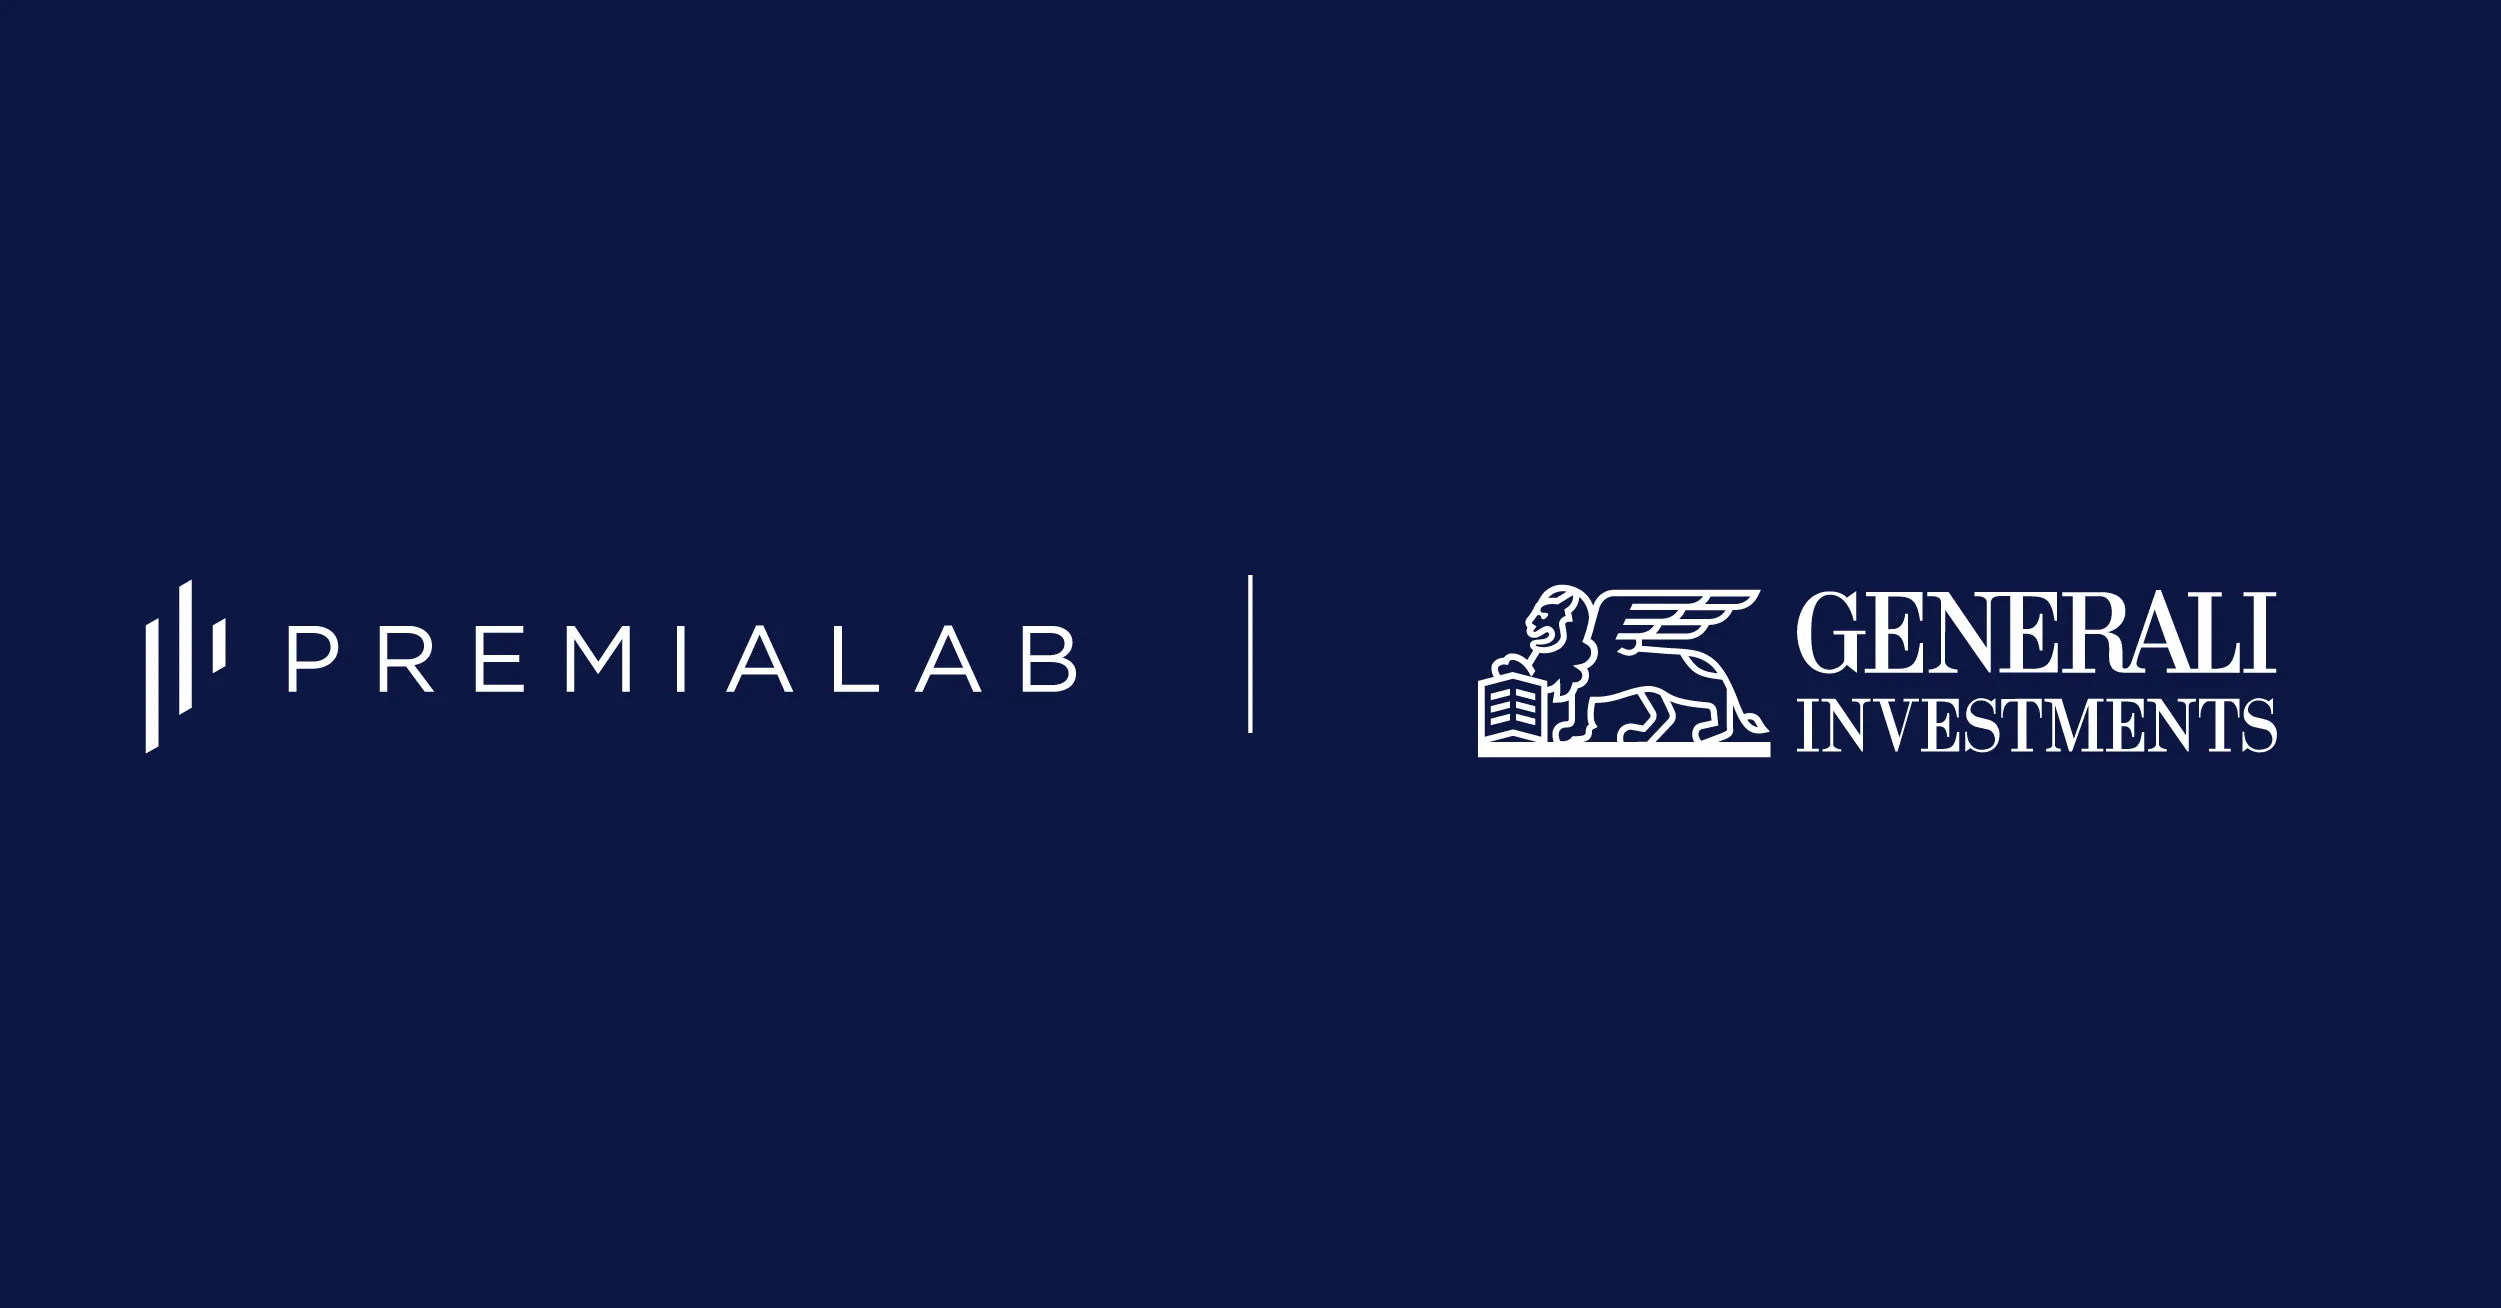 Generali Partners with Premialab for Multi-Asset Investments